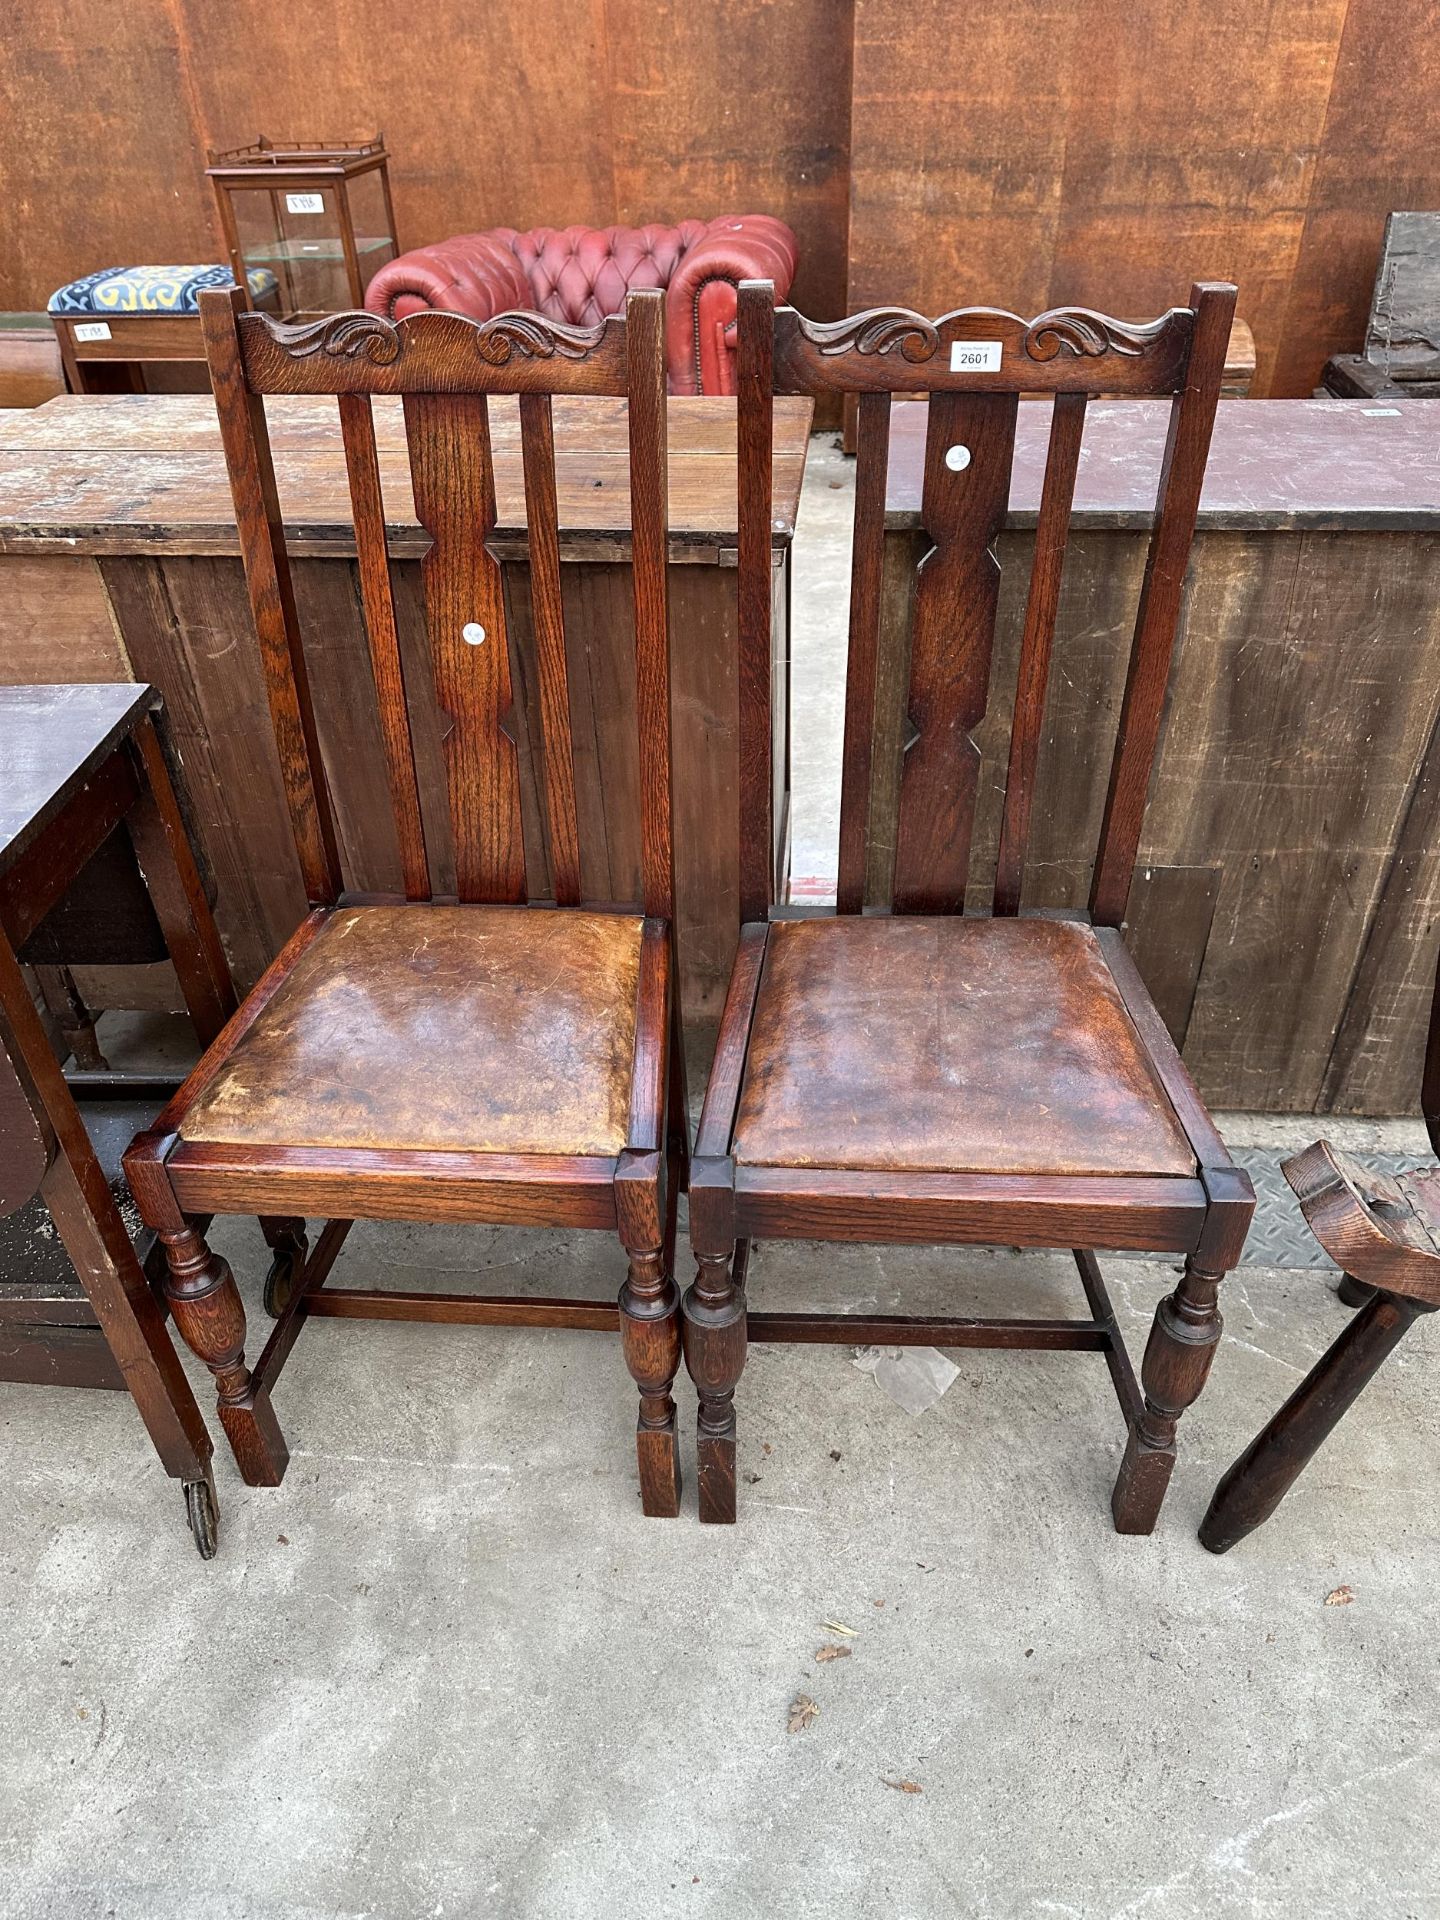 A PAIR OF 20TH CENTURY OAK DINING CHAIRS